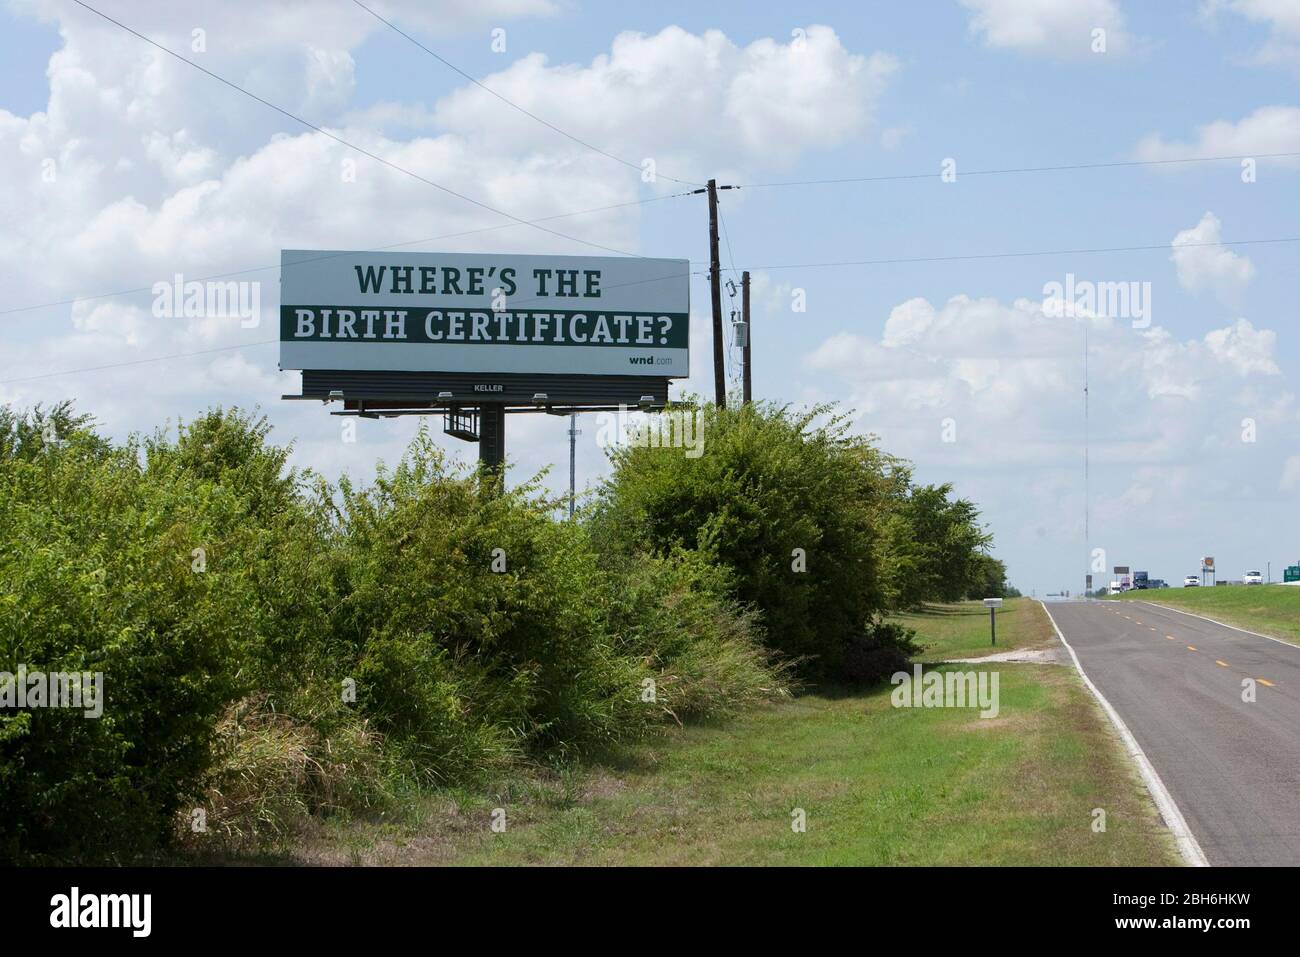 Bruceville-Eddy, Texas - August 18, 2009: A billboard along Interstate 35 south of Waco mounted by the conservative group WND.com questions the validity of U.S. President Barack Obama's birth certificate. The effort is being coordinated nationwide by WorldNetDaily as part of an effort to discredit Obama's citizenship.  ©Bob Daemmrich Stock Photo